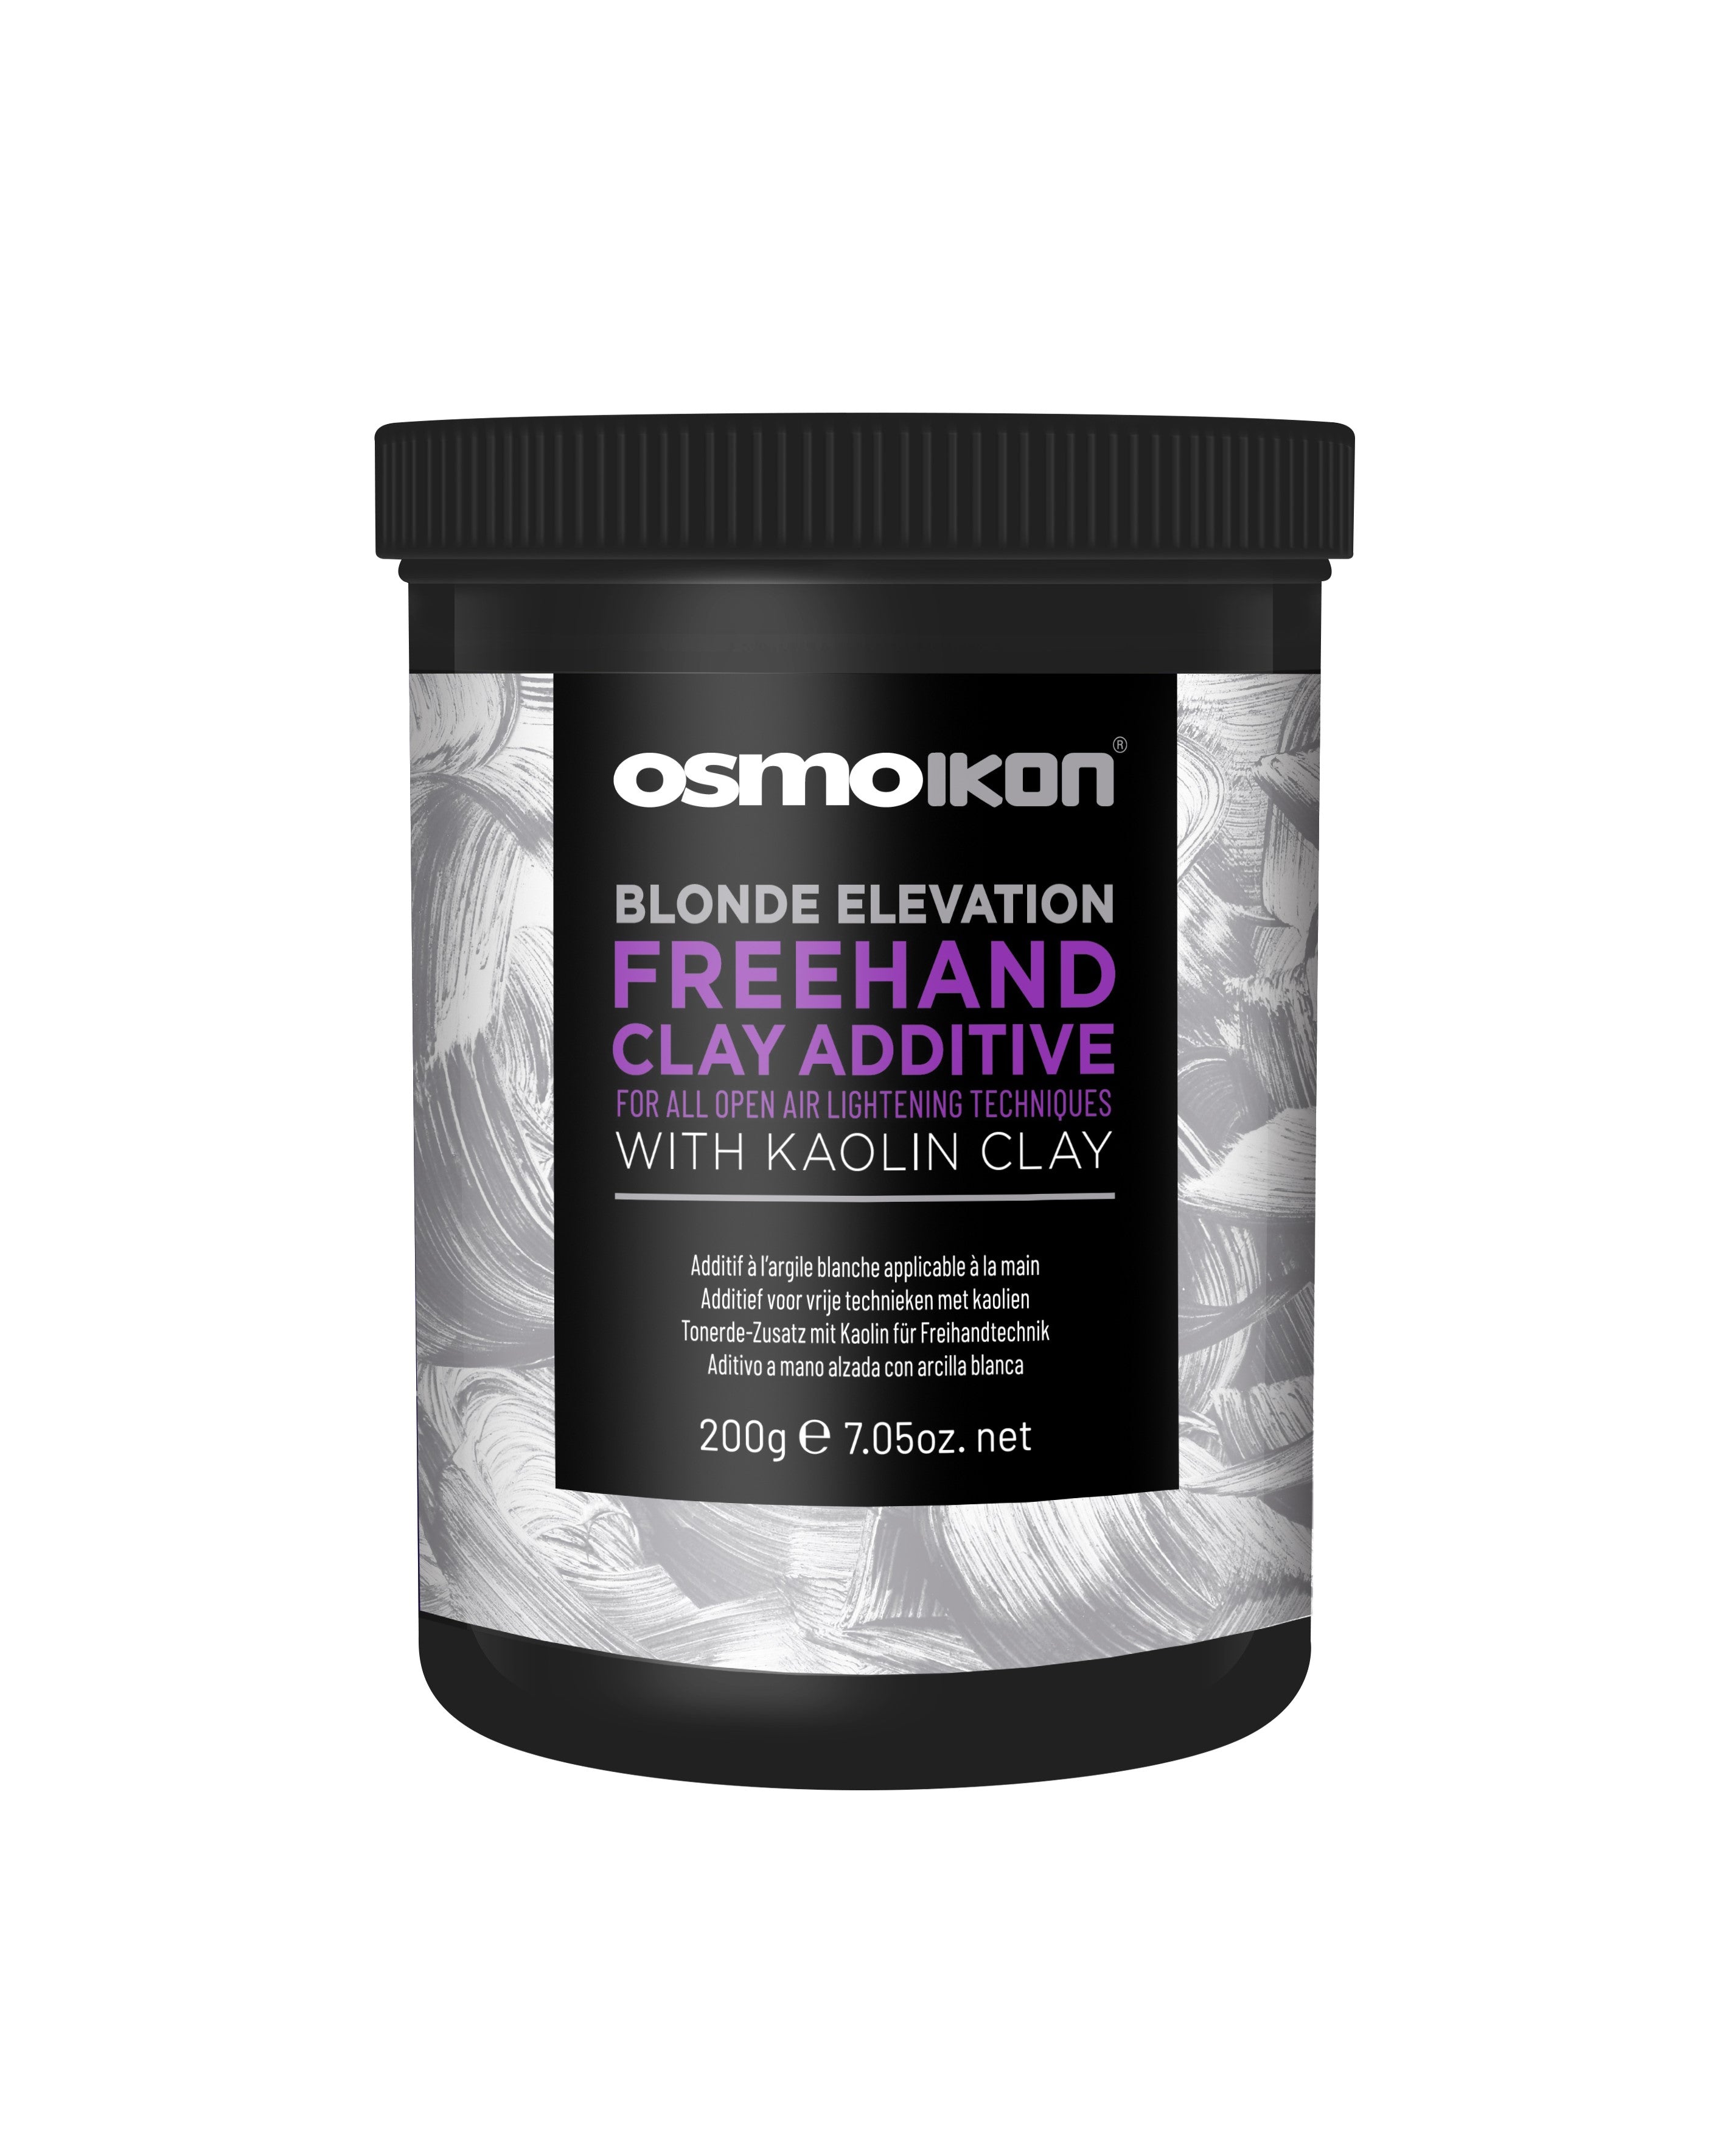 Osmo Ikon Blonde Elevation Freehand Clay Additive (200g) - Ultimate Hair and Beauty